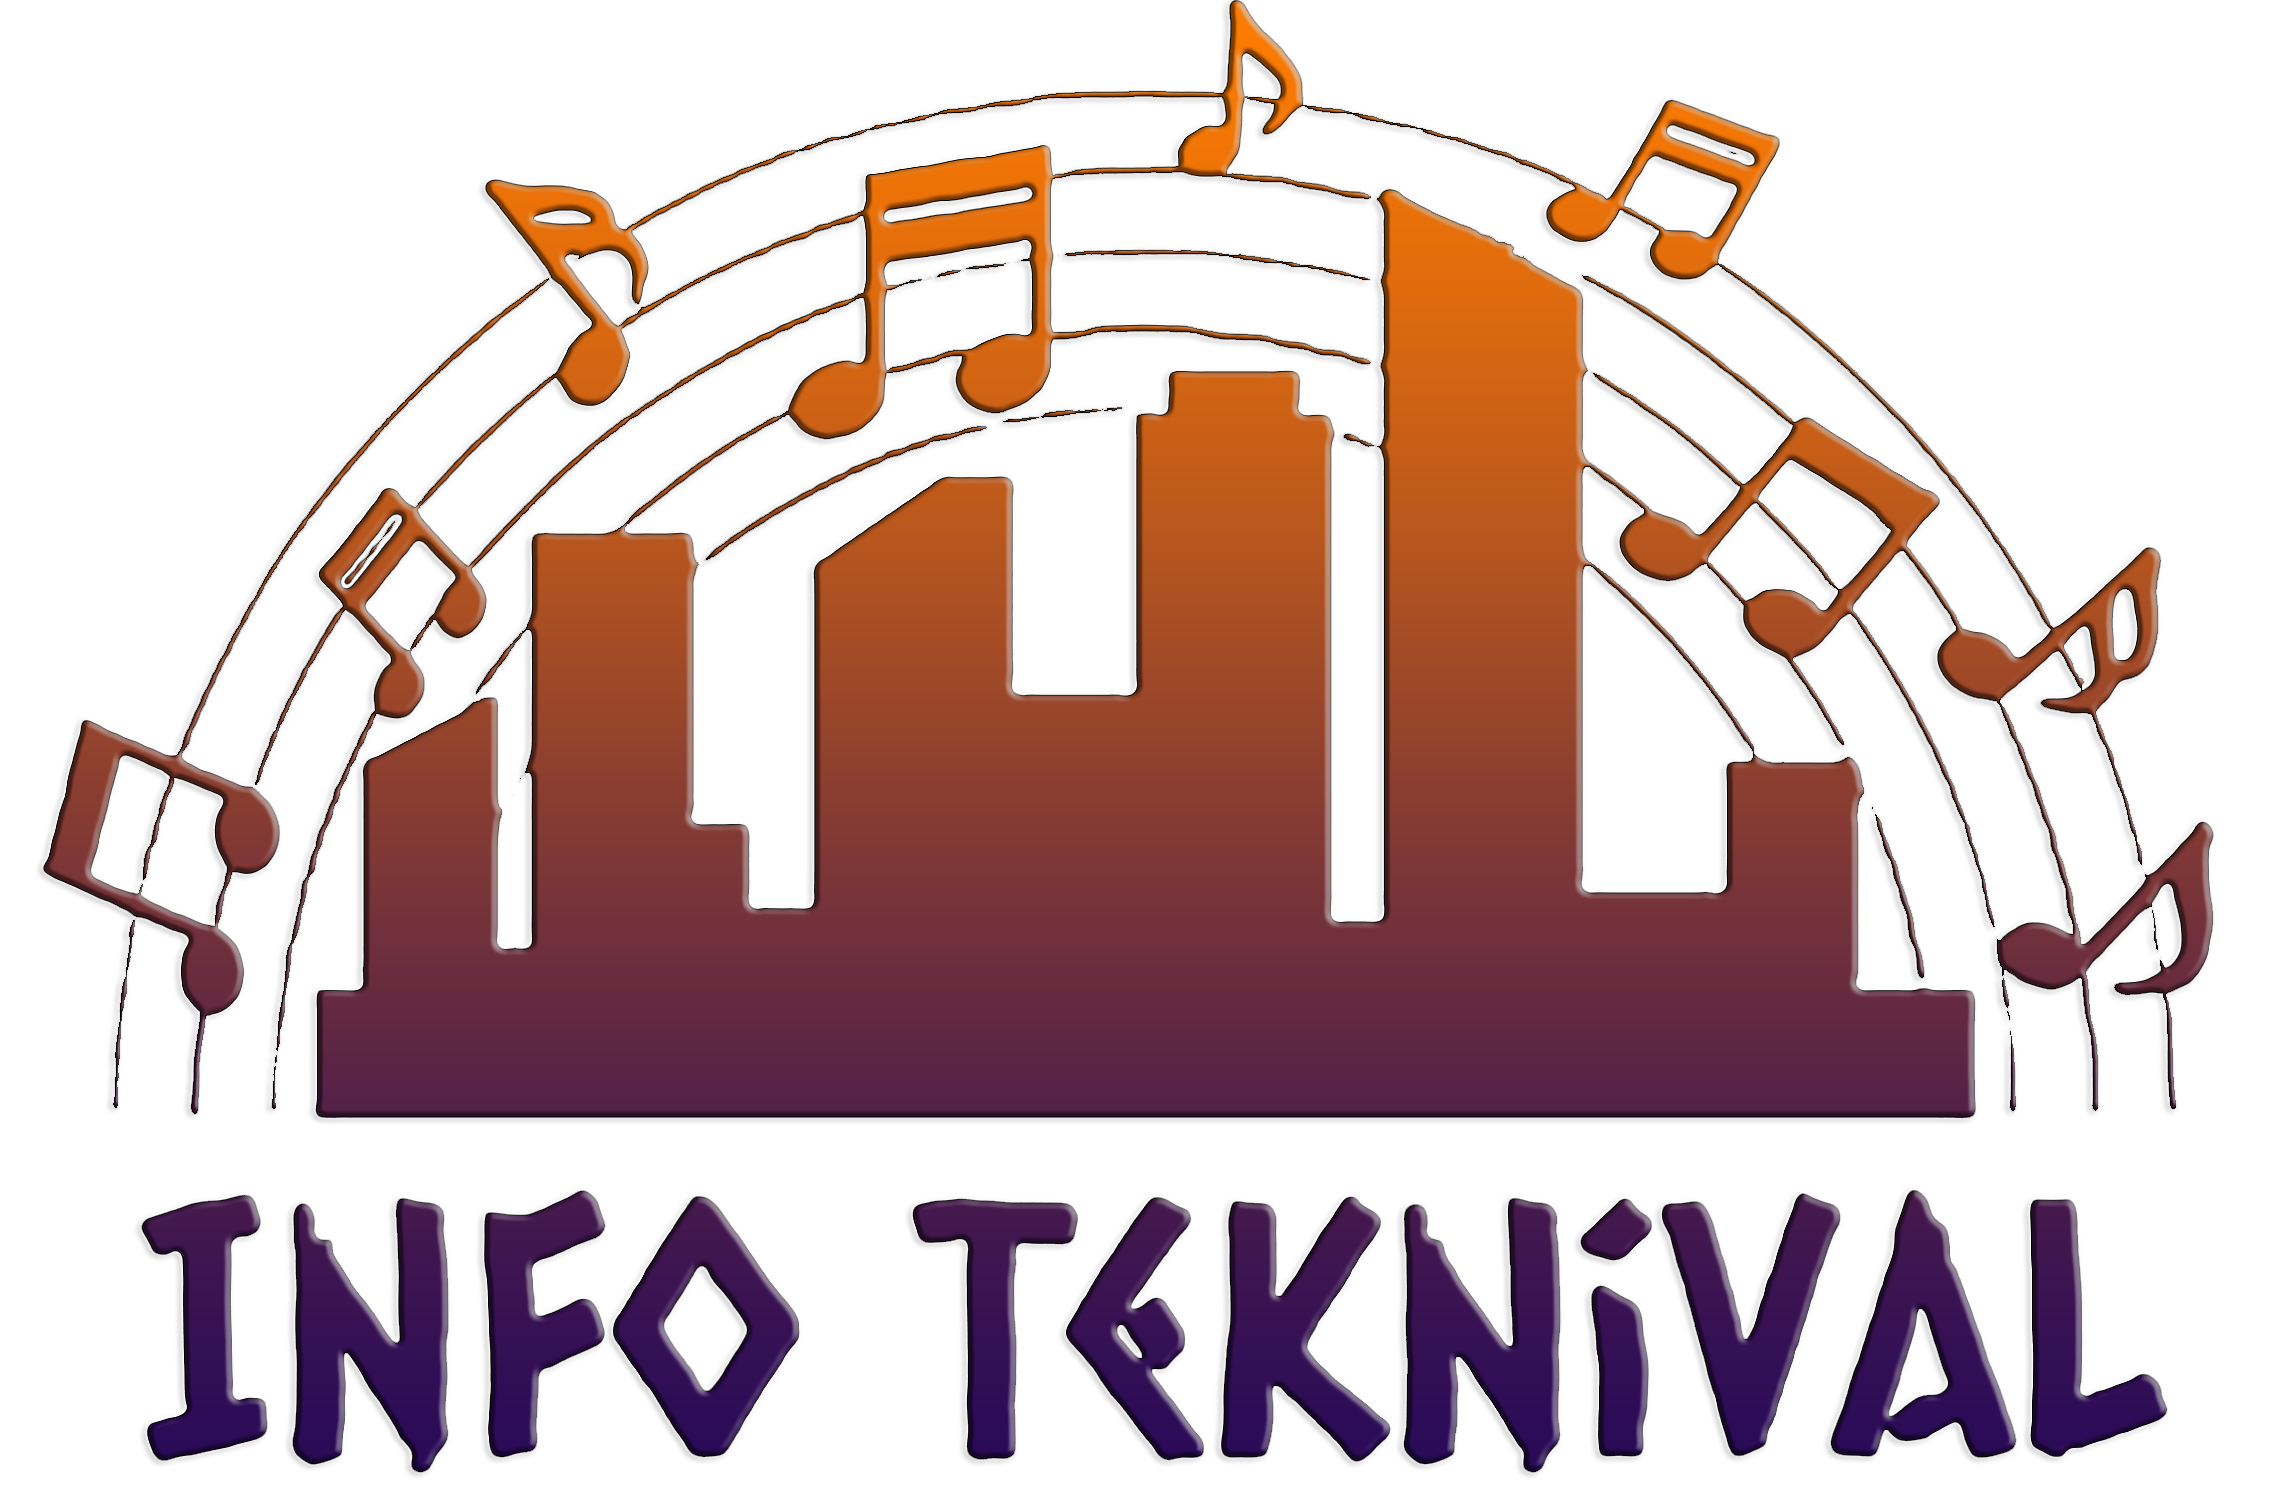 Info Teknival - Location - Events - Free party